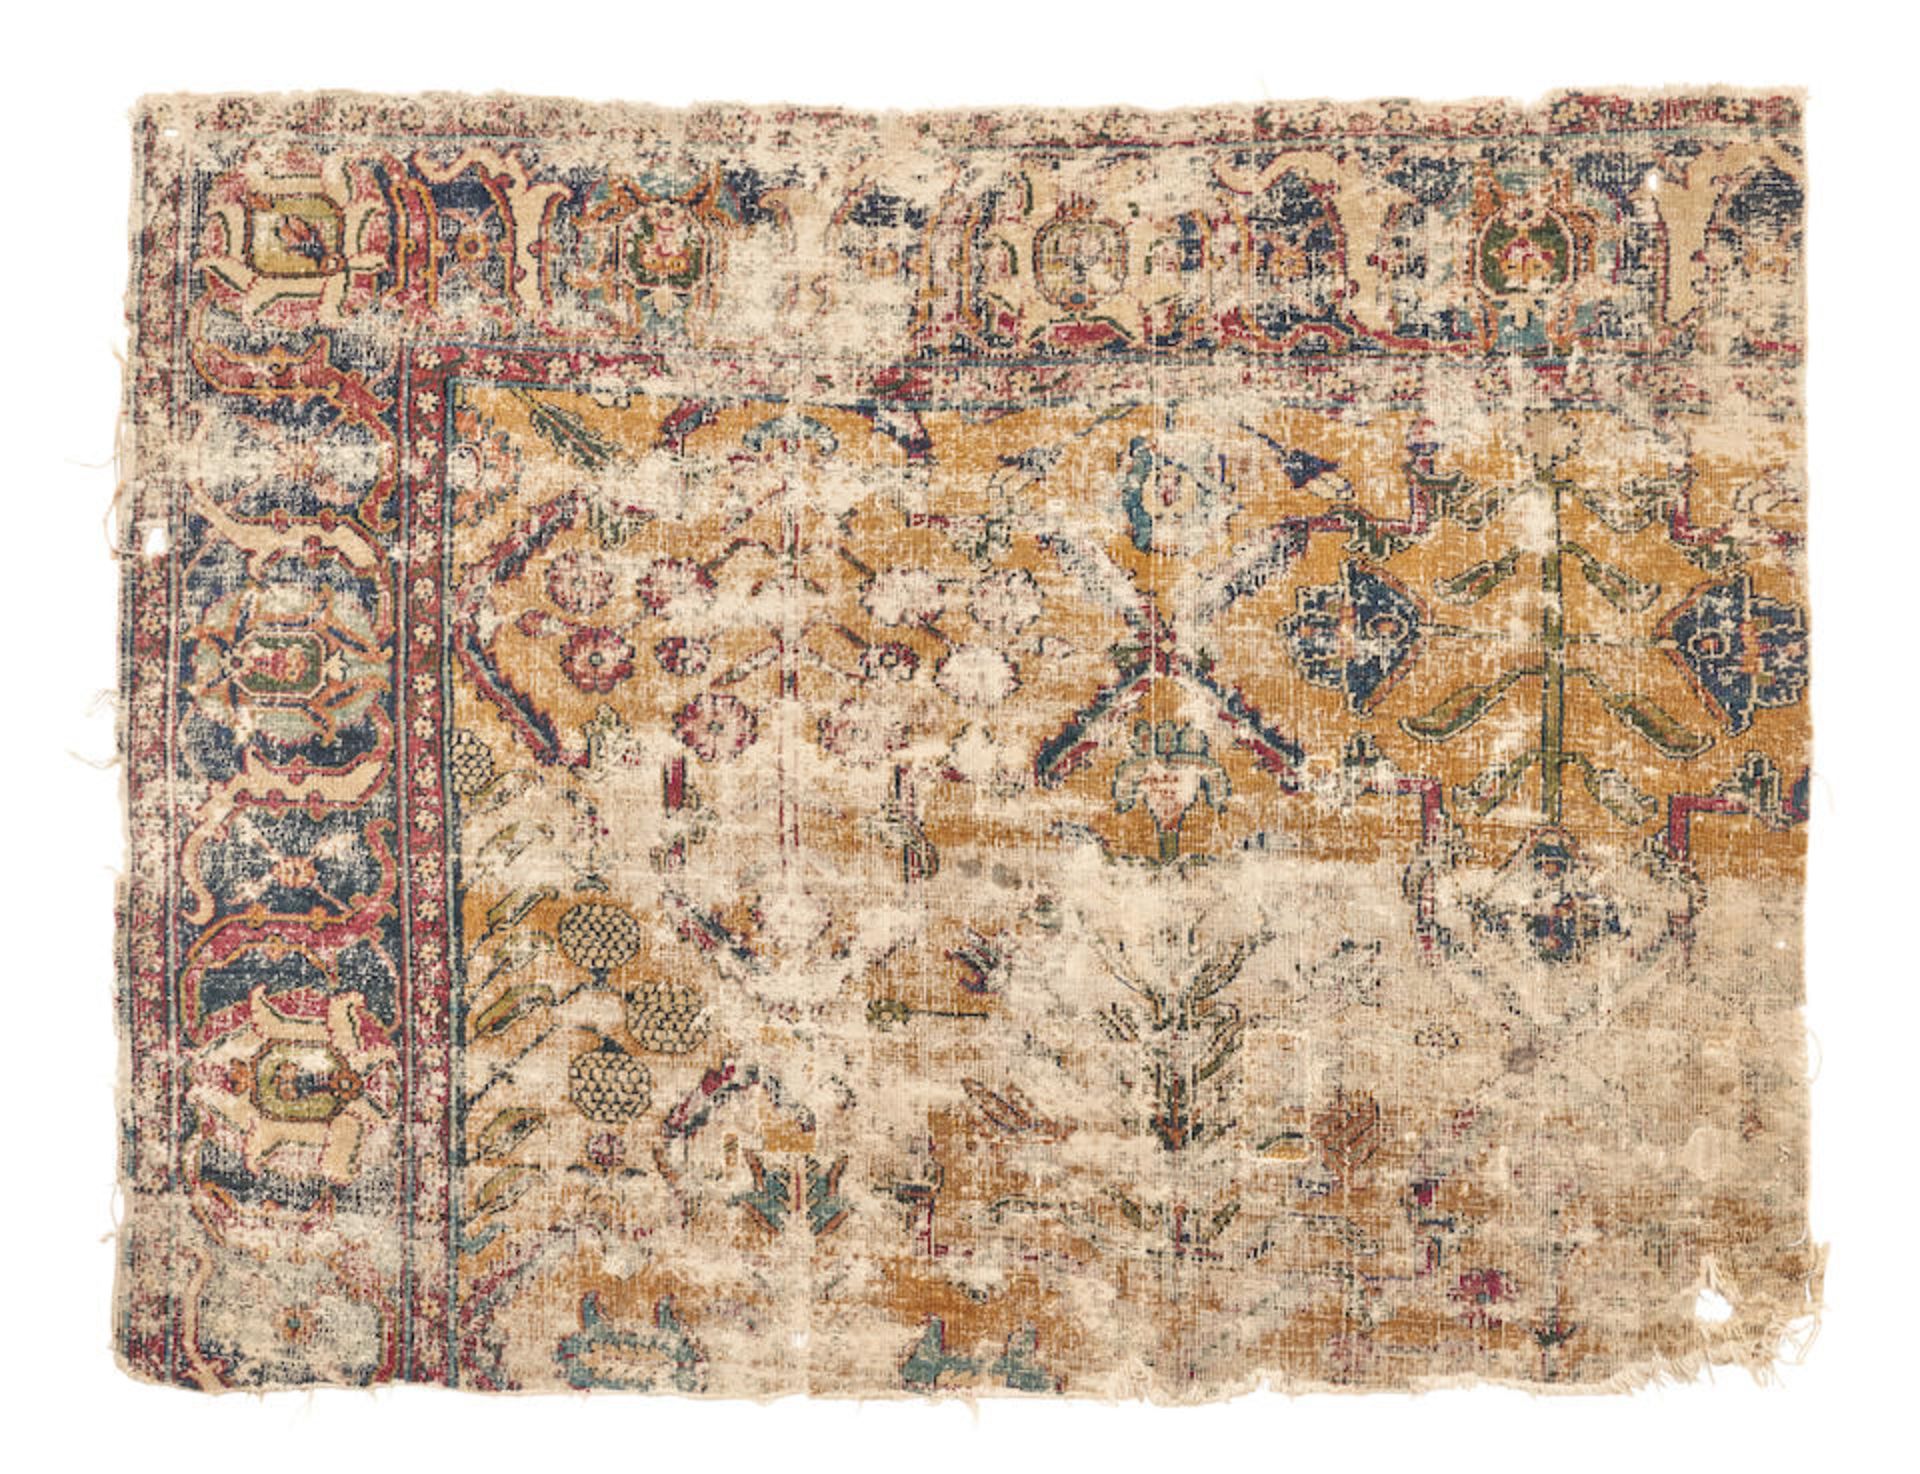 Early Indo-Isfahan Rug Fragment India 4 ft. 4 in. x 3 ft. 5 in.